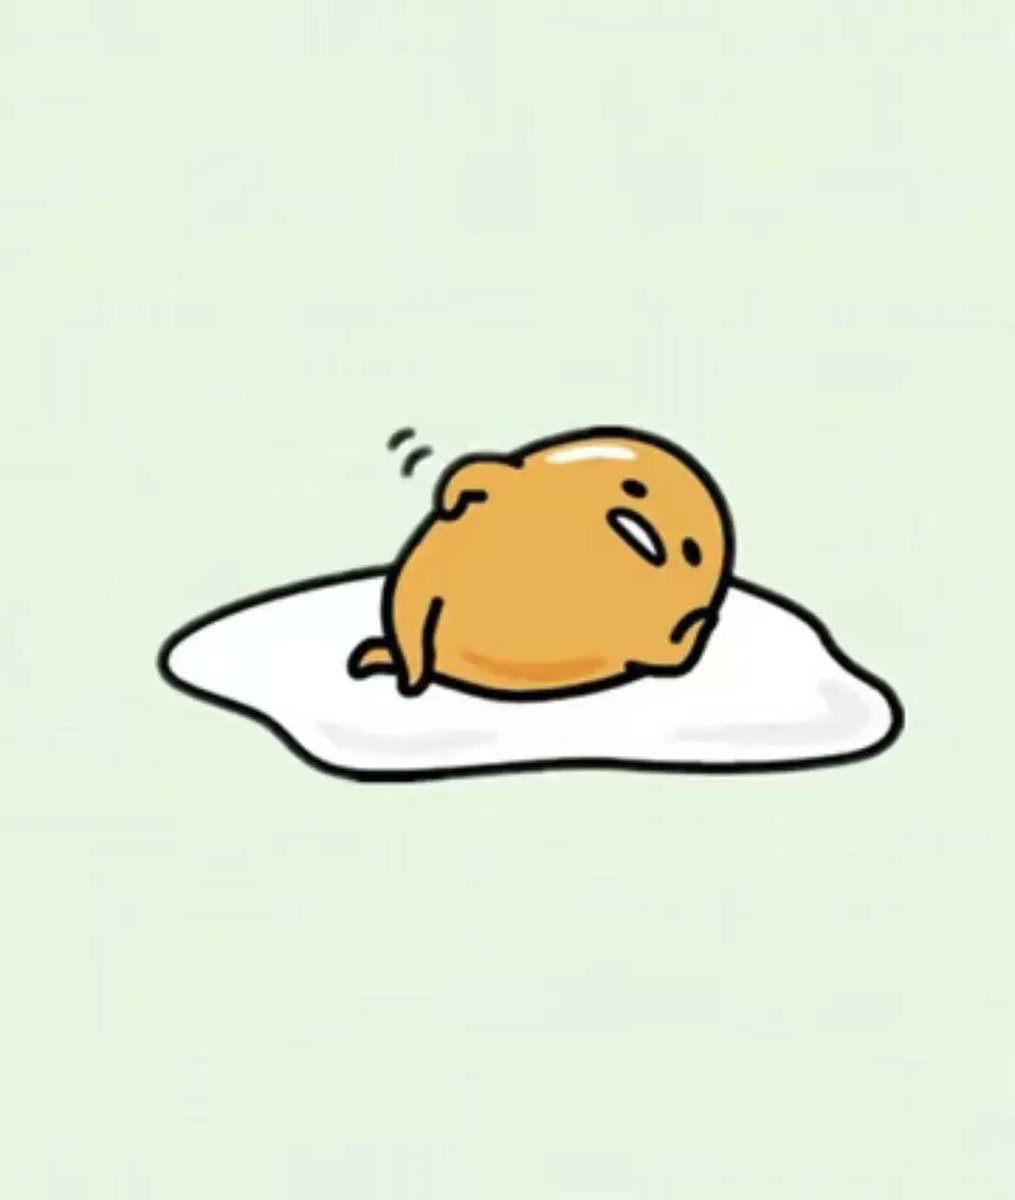 #MySiblingsRomance Seseung describes Jaehyung as like an omelette (egg yolk) that lazily lies around.

(Isn't that Gudetama? Hahahahaa omg I totally see that in him, so cute)